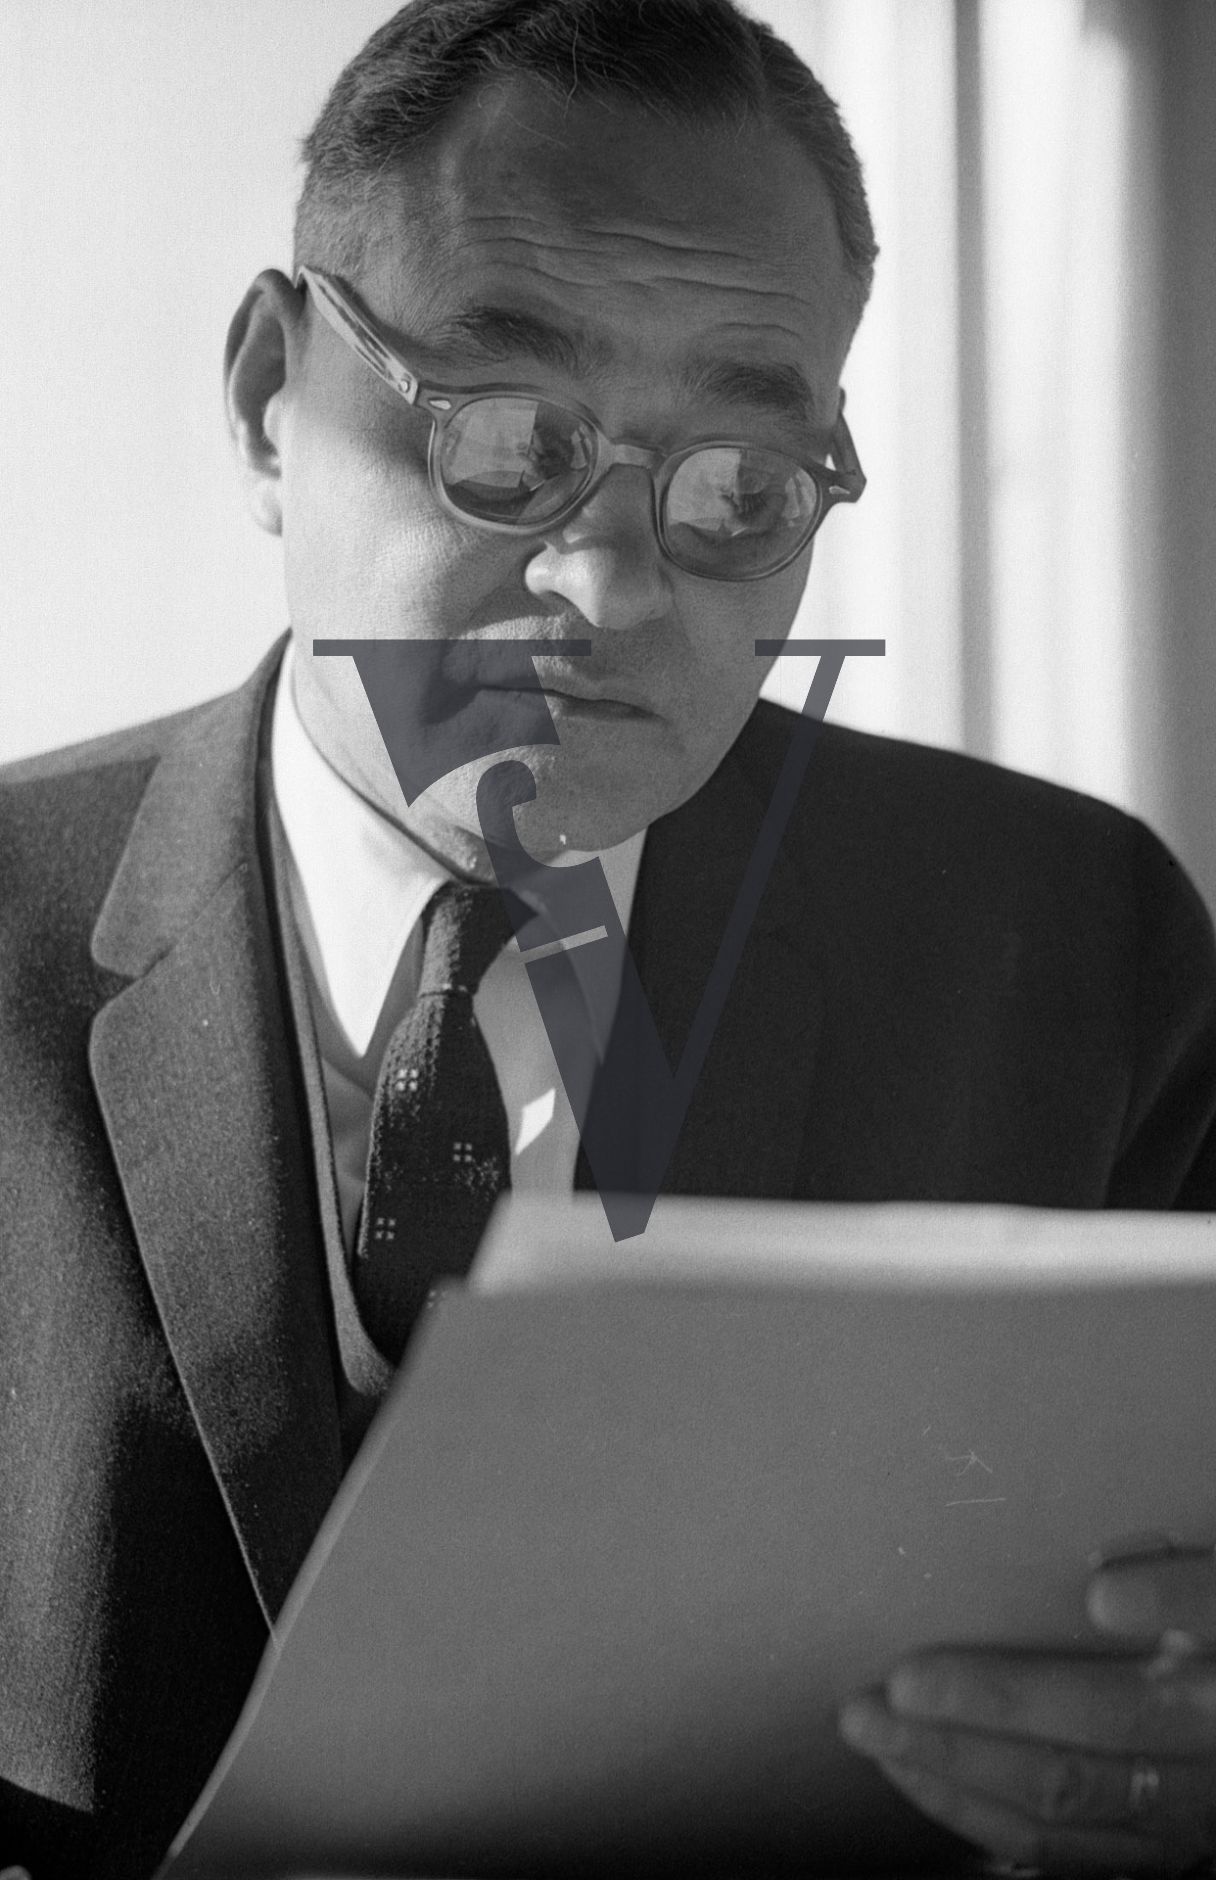 Ralph Bunche, portrait, writing, political scientist, diplomat, close-up, with document.